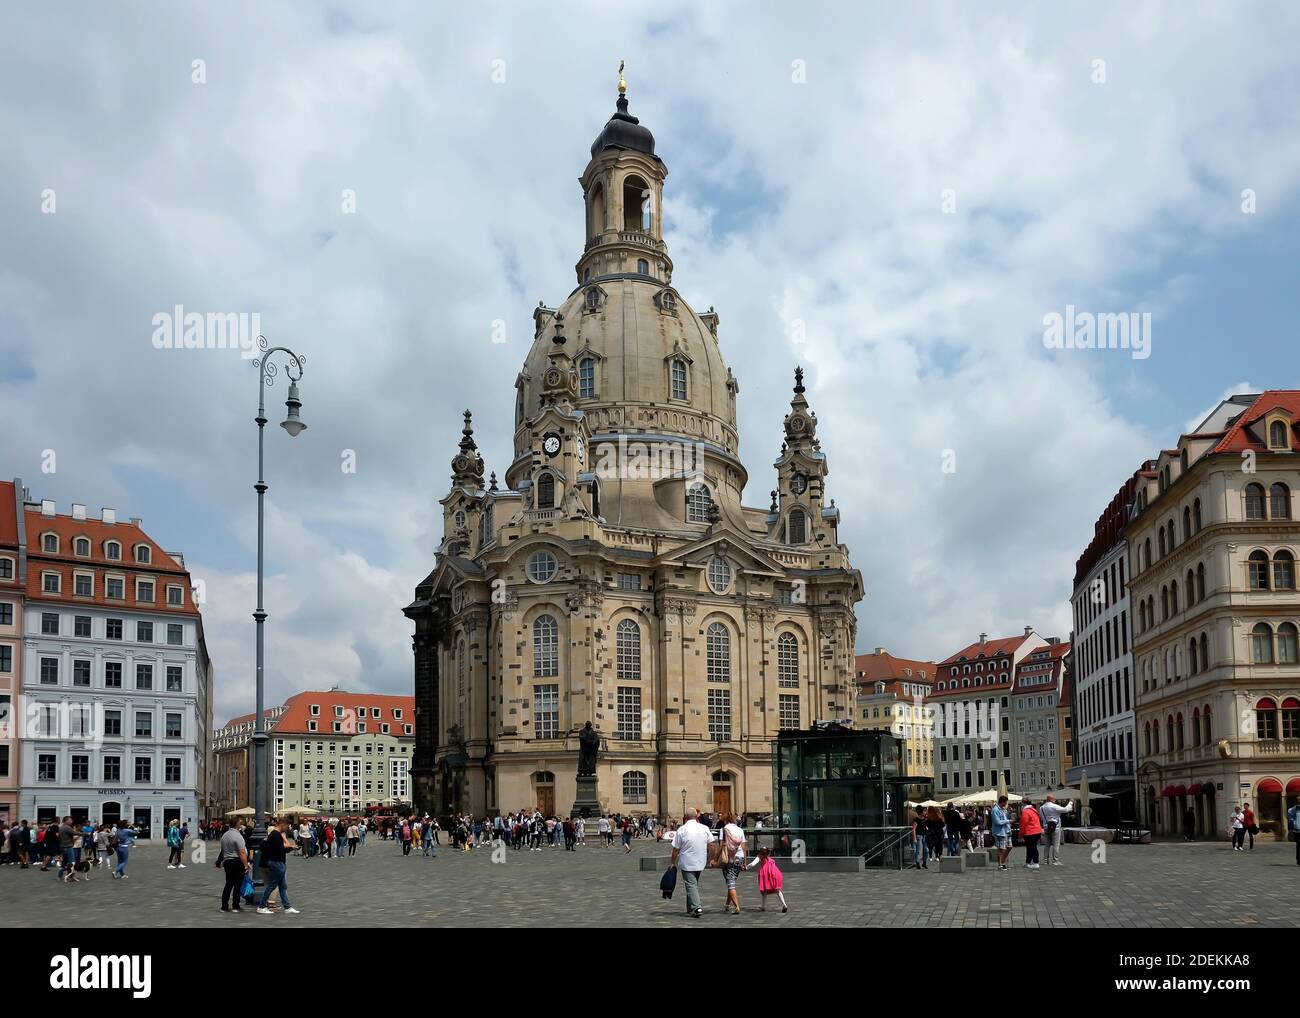 The Dresdner Frauenkirche ('Church of Our Lady') is a Lutheran church in Dresden, Germany. Stock Photo